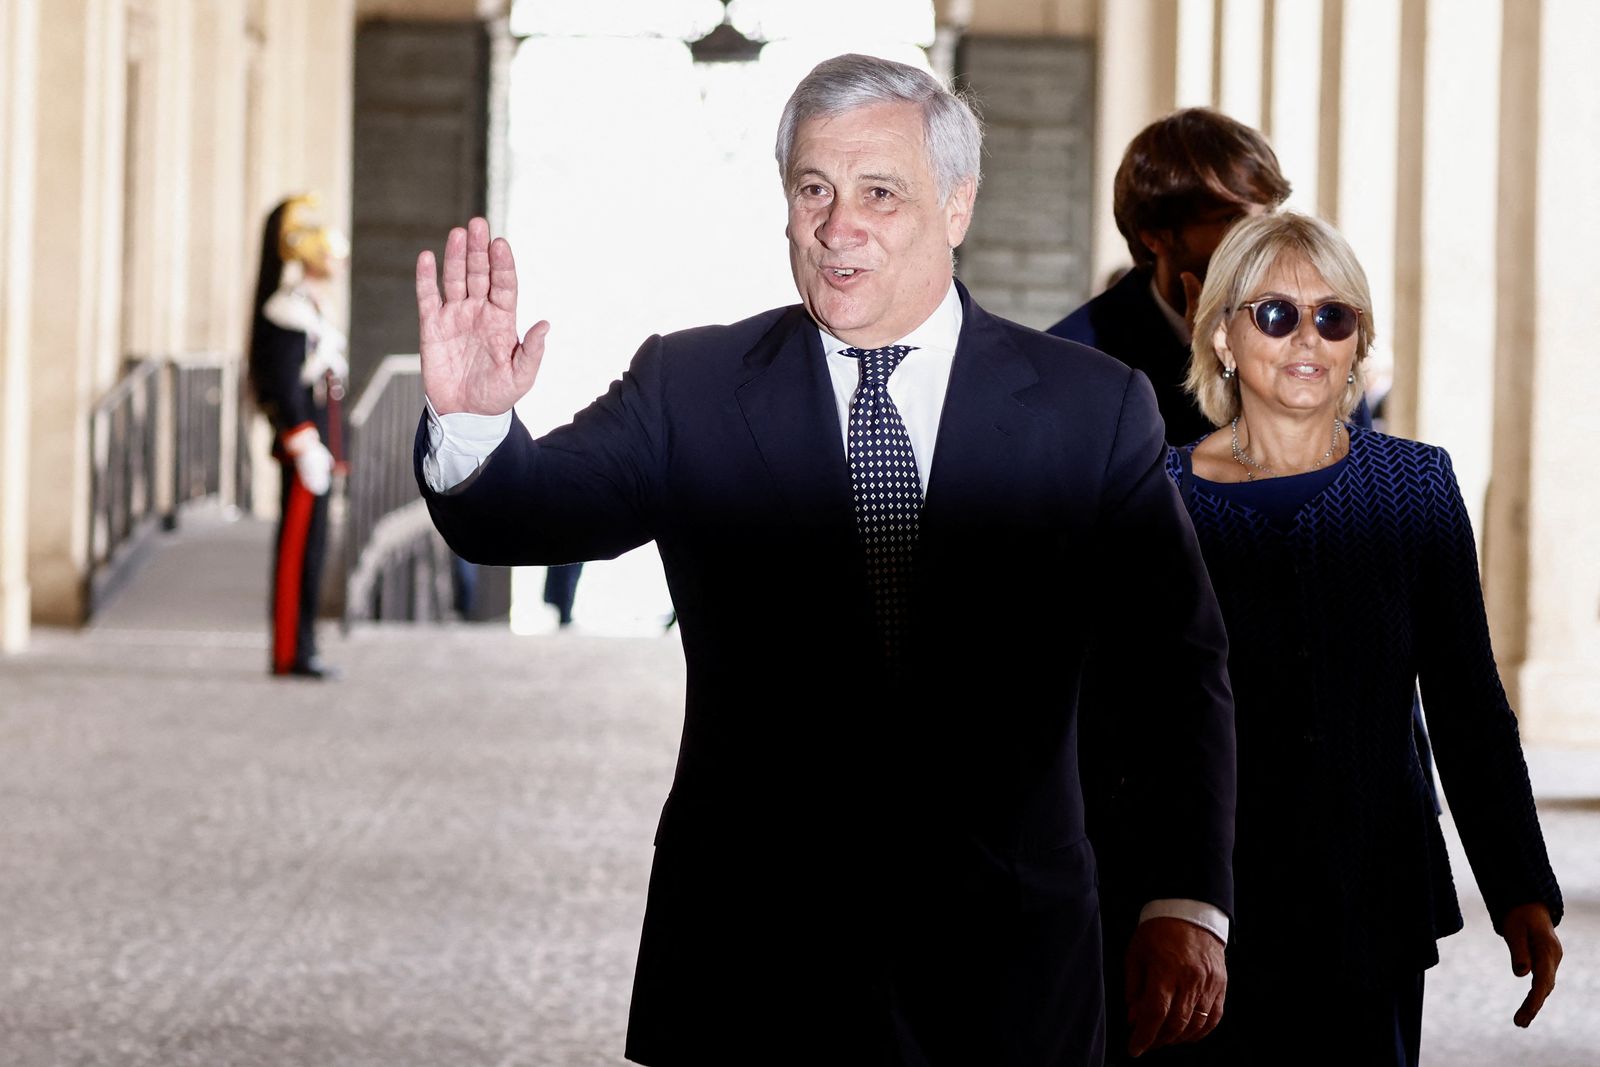 Italy's newly appointed Deputy PM and Foreign Minister Tajani attends a swearing-in ceremony at the Quirinale Palace, in Rome - REUTERS